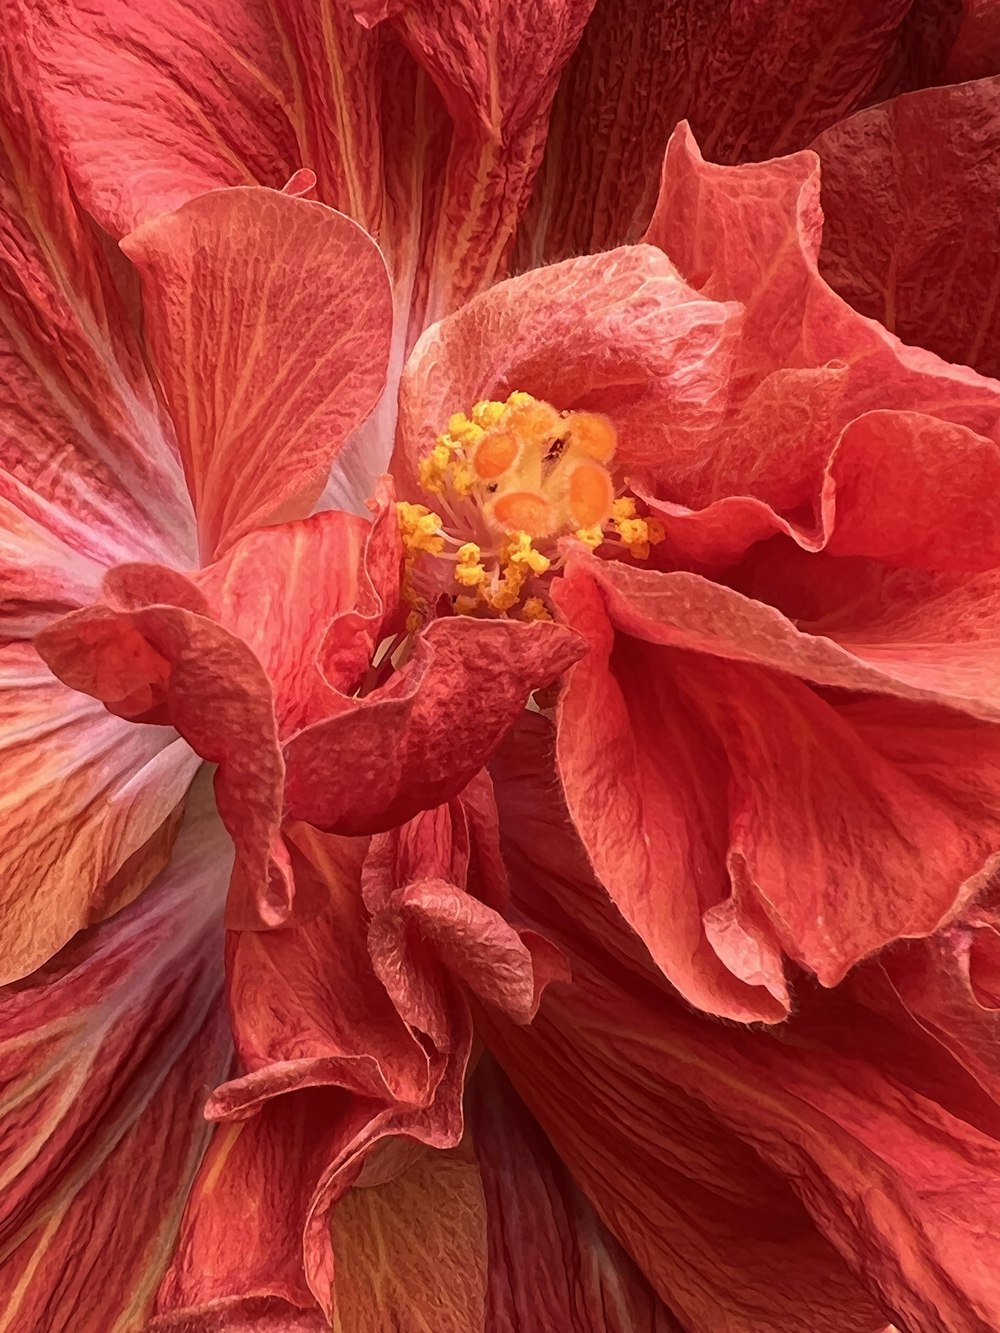 a large red flower with a yellow center